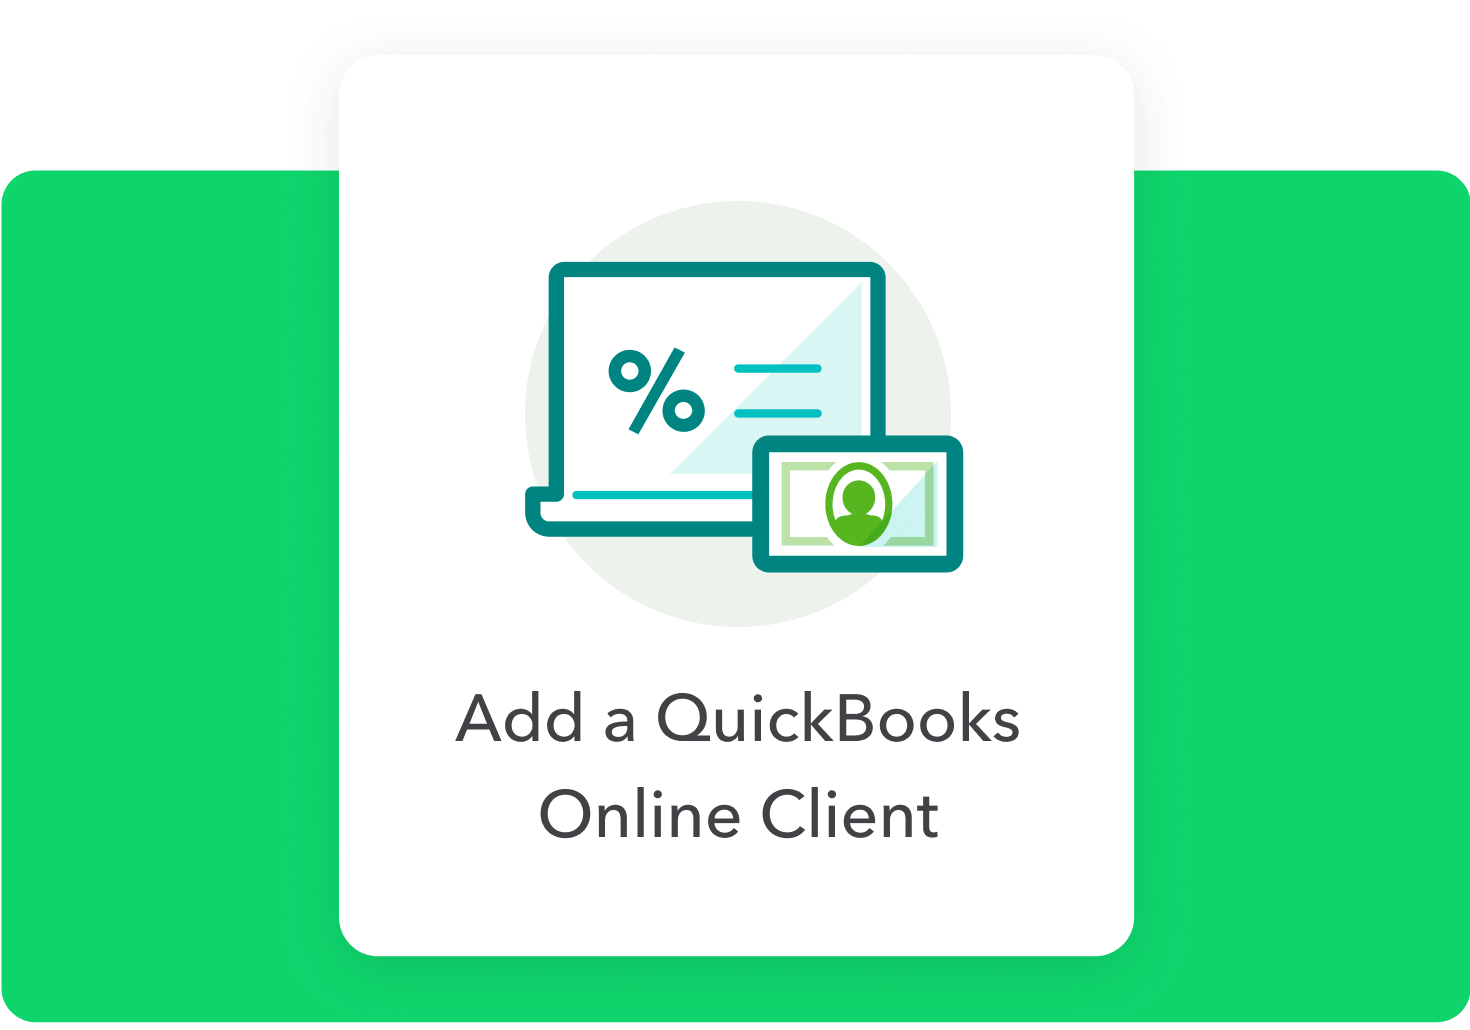 Be ready for MTD for VAT with QuickBooks